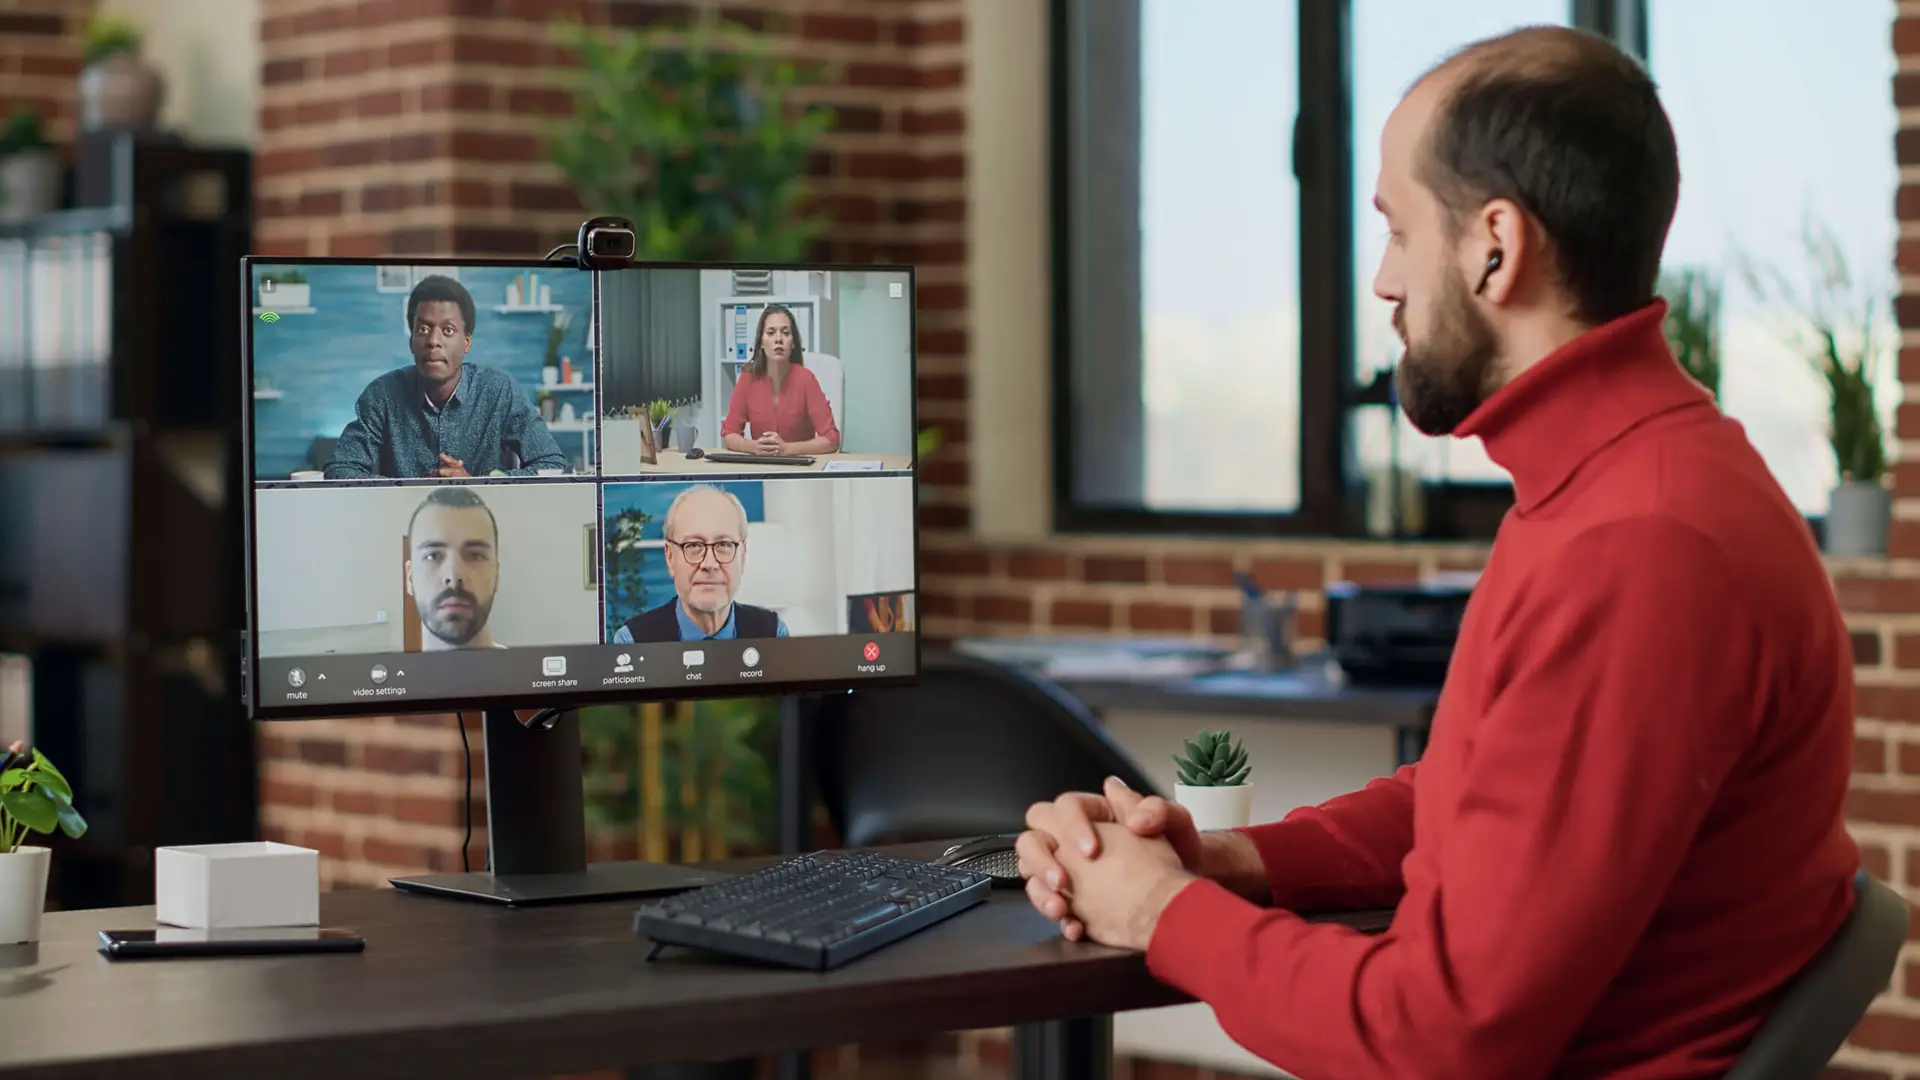 office-worker-attending-videocall-meeting-with-business-people-talking-about-financial-growth-male-employee-using-remote-videoconference-chat-discuss-wireless-communication-tripod-shot